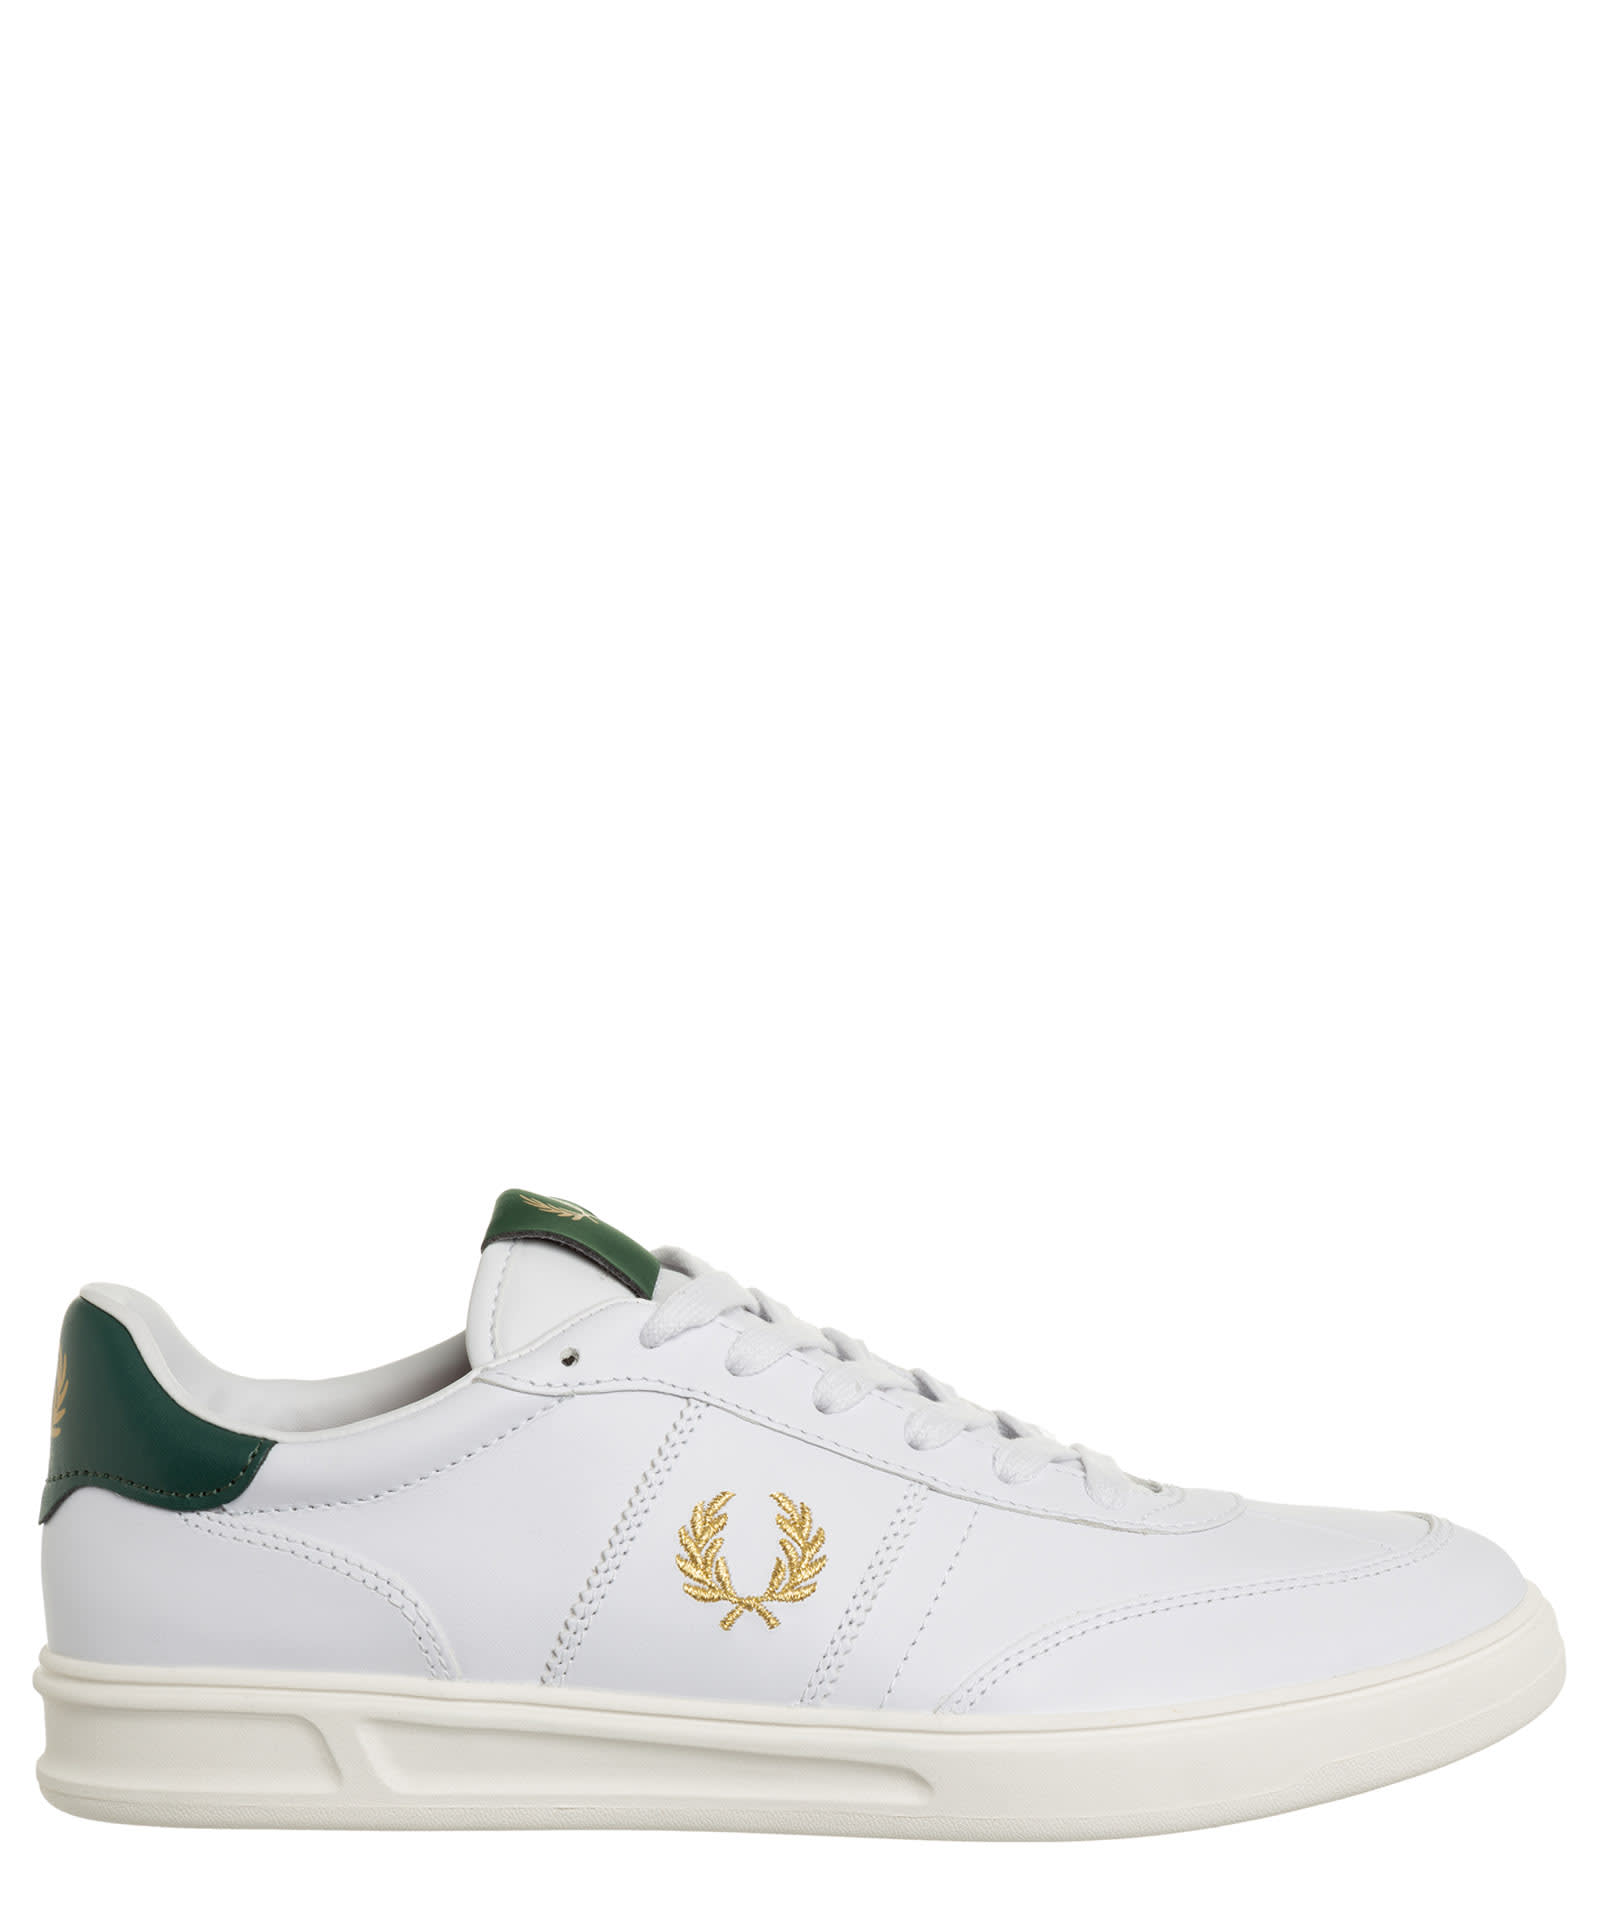 FRED PERRY B400 LEATHER SNEAKERS